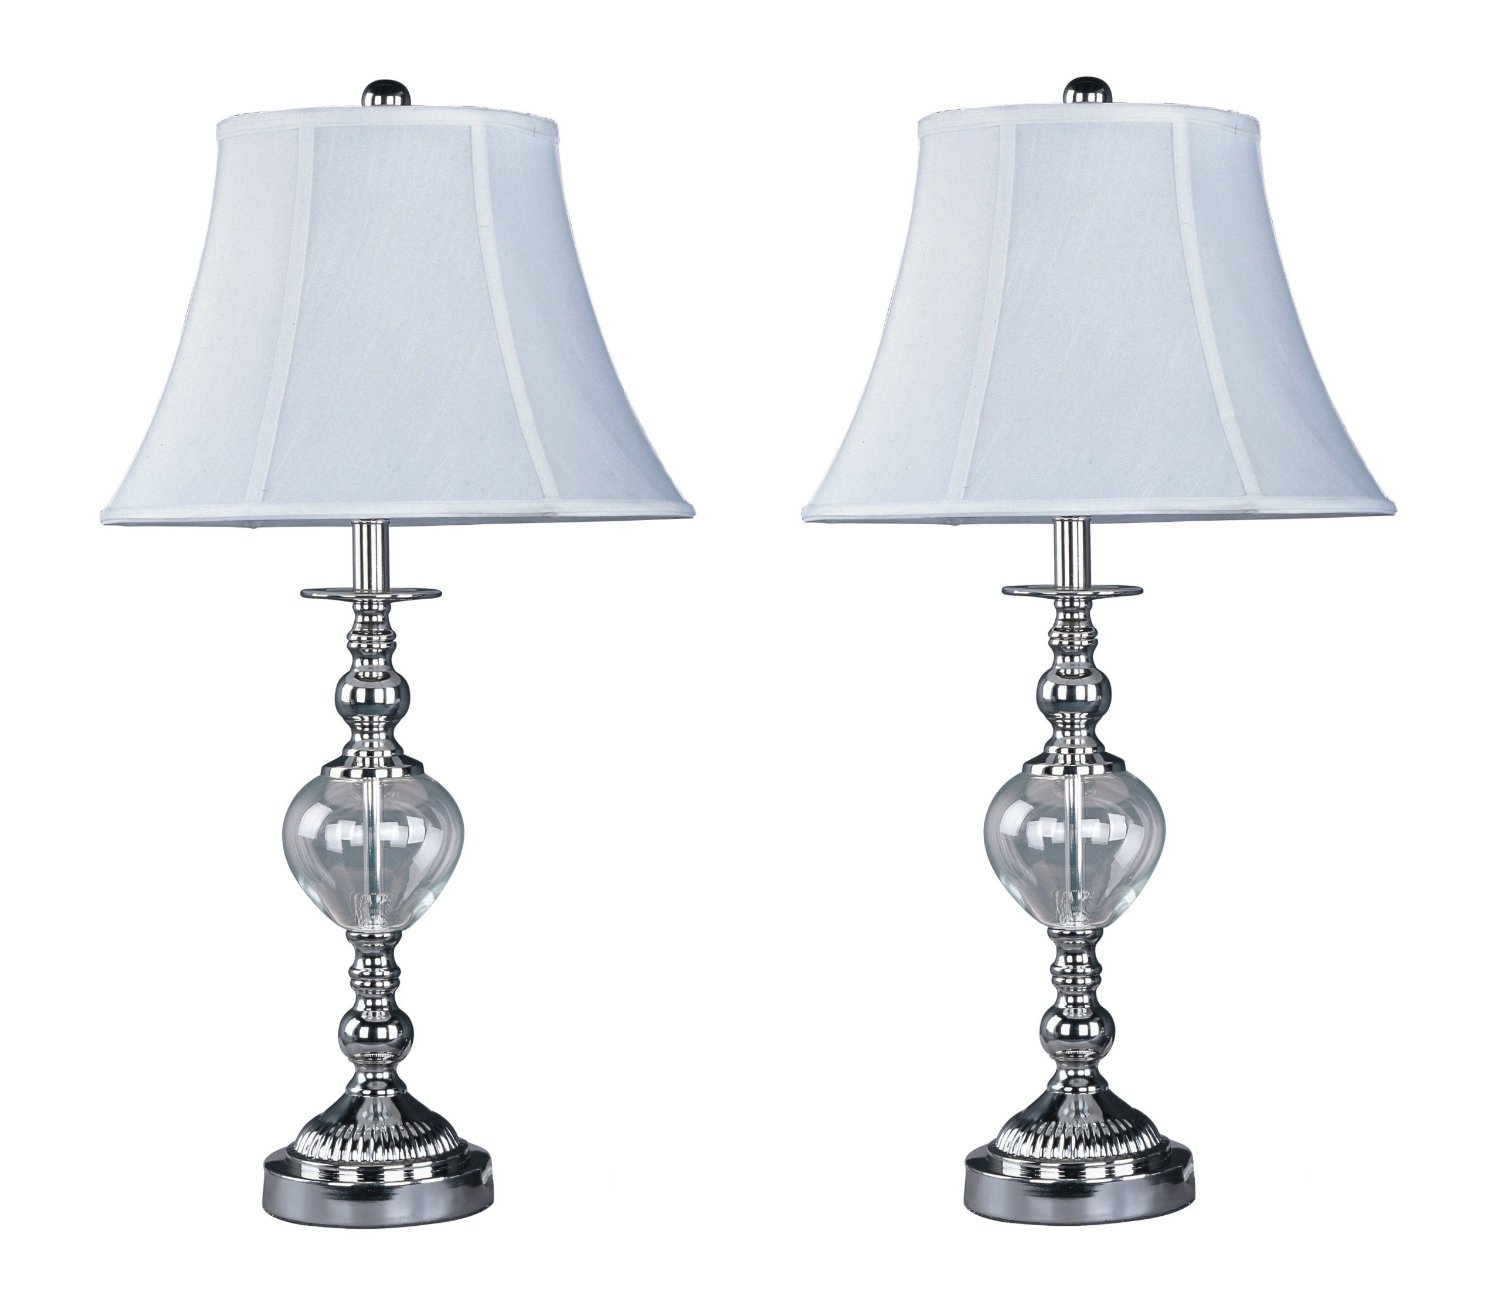 Park Madison Lighting Contemporary Design 26-3/4-Inch Tall Table Lamp Set